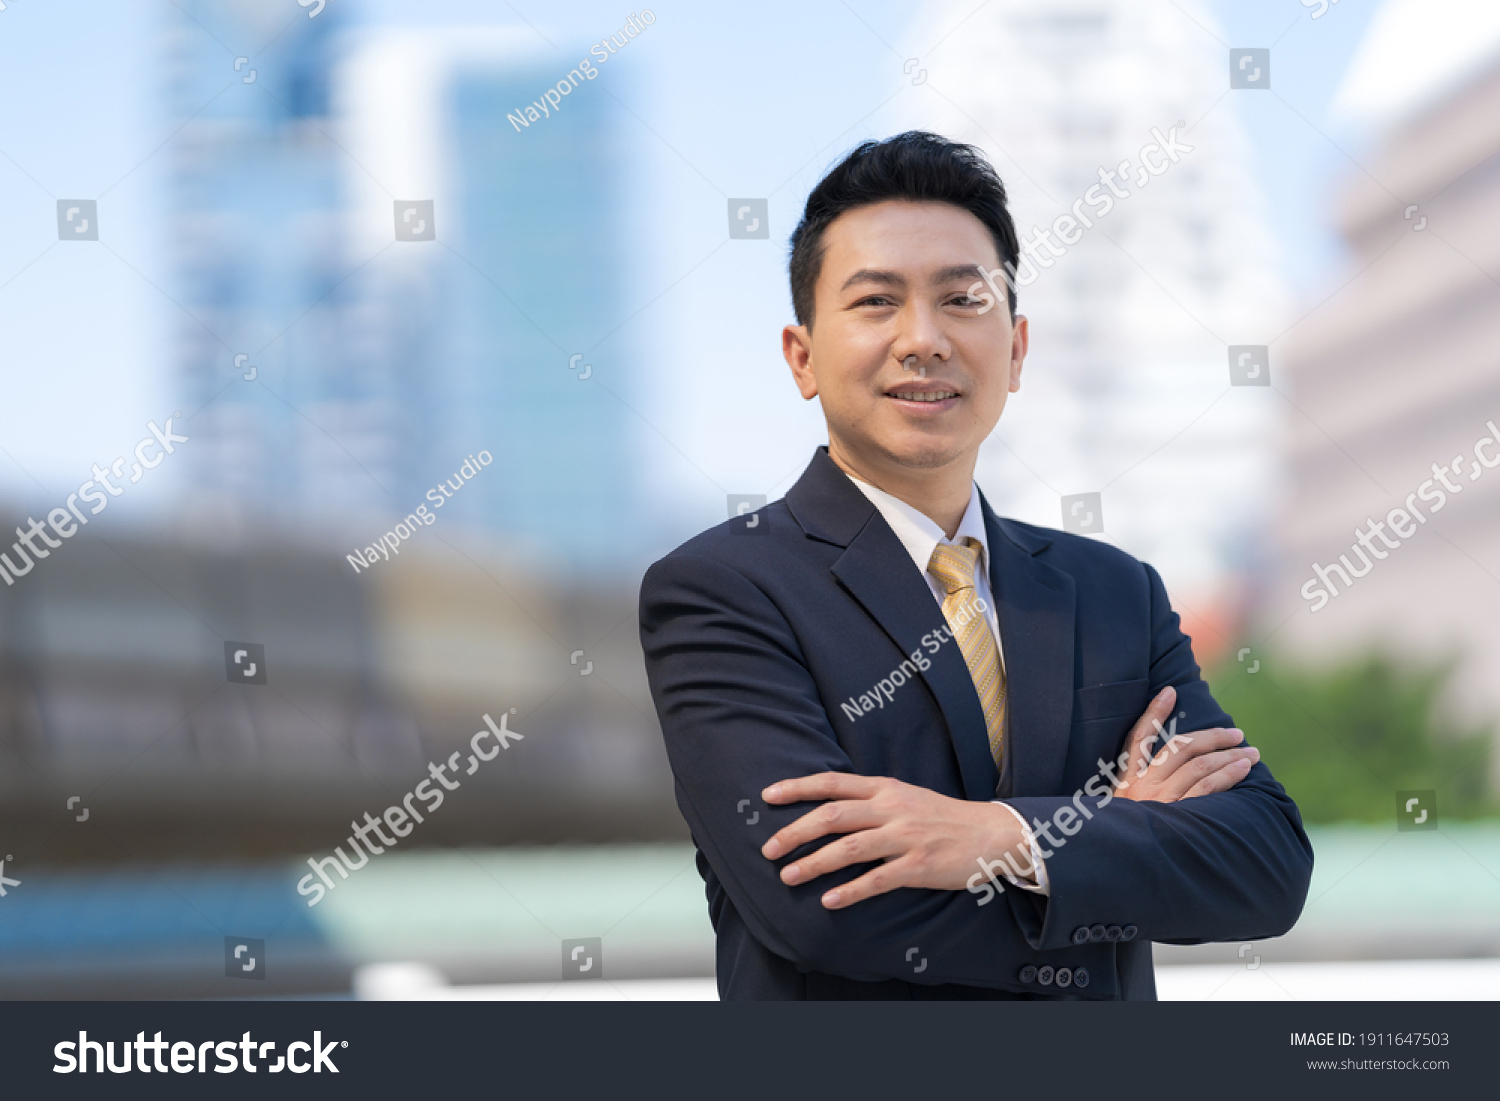 Portrait of successful asian businessman standing with arms crossed standing in front of modern office buildings #1911647503